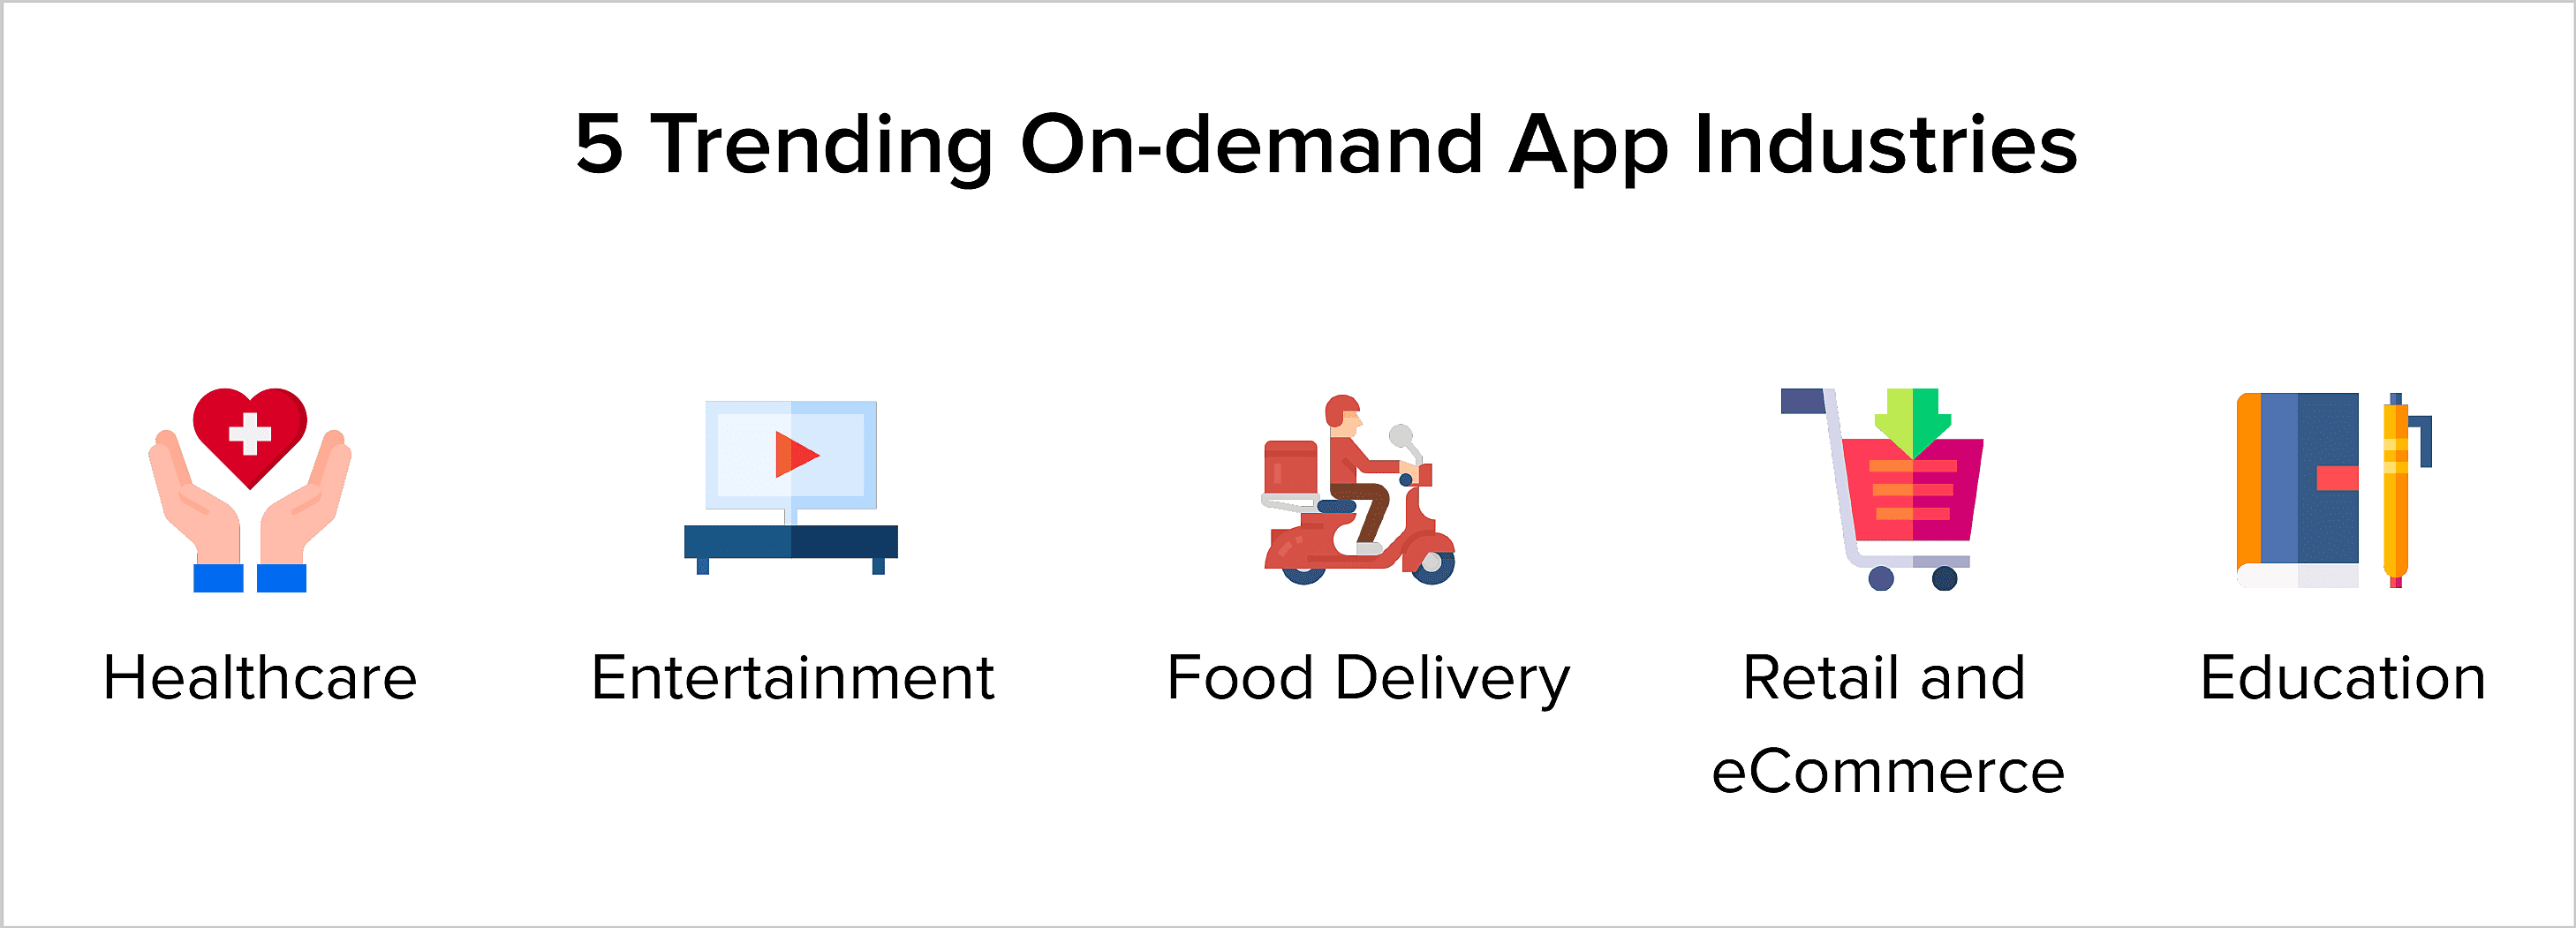 Top 5 industries driving the On-demand App economy